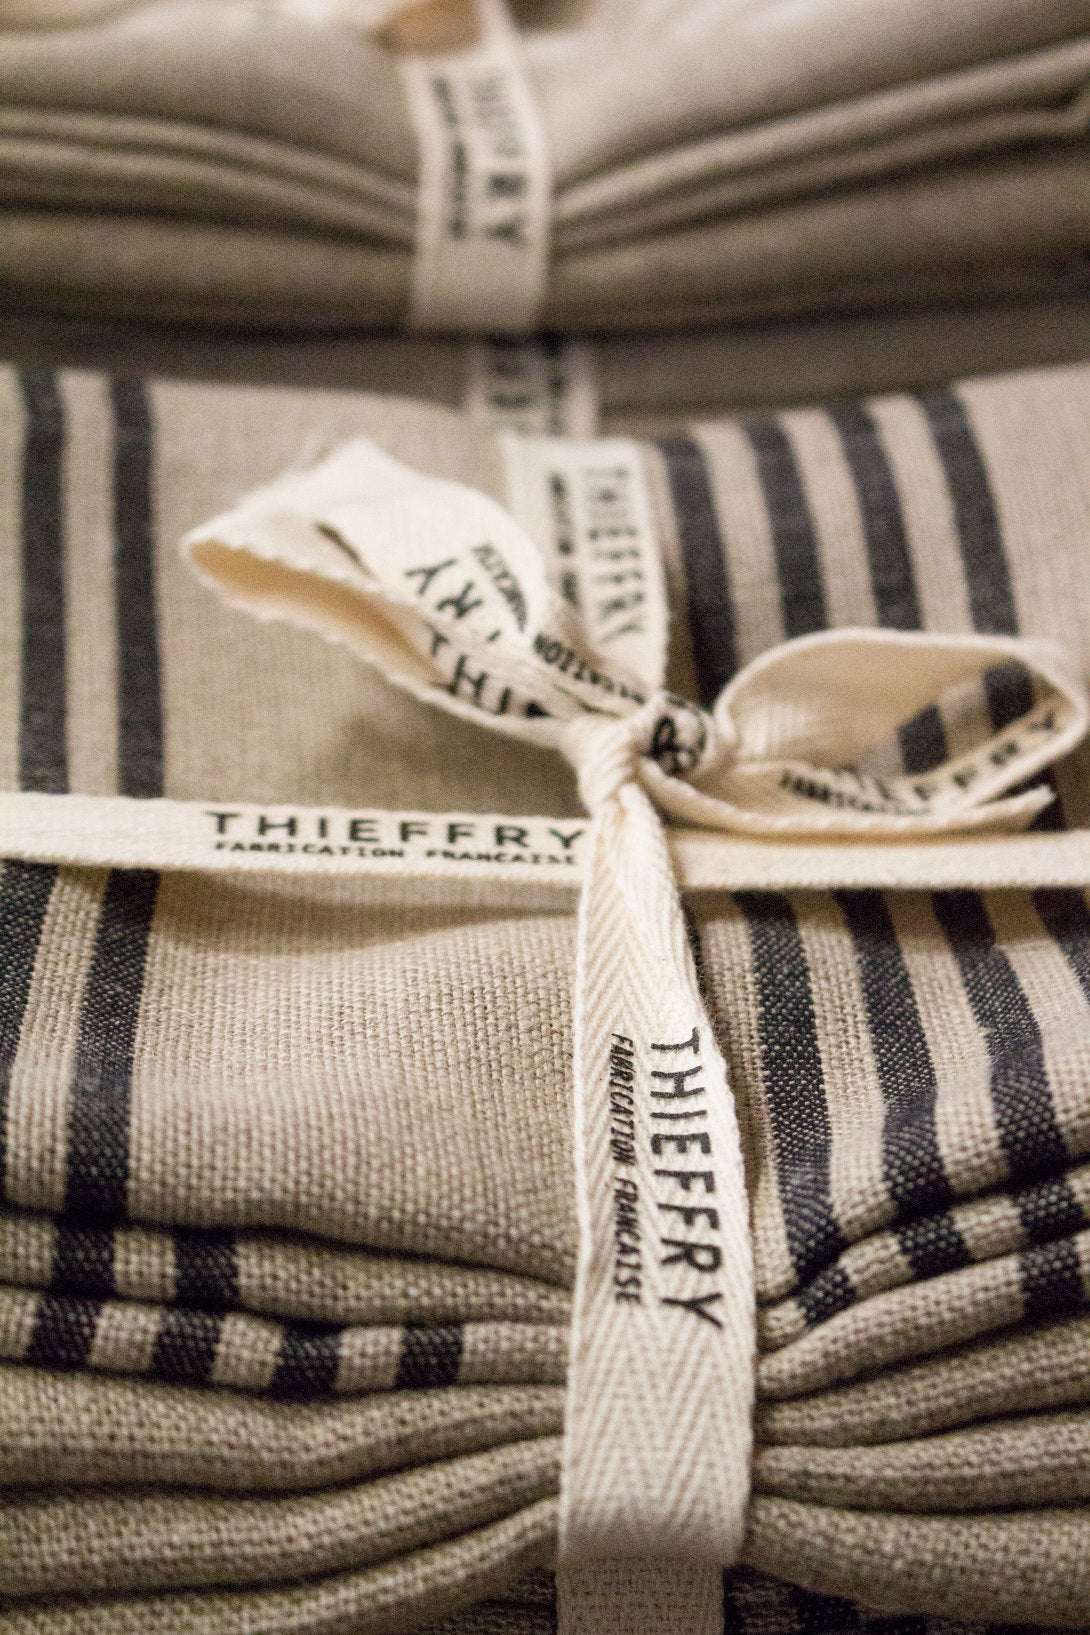 Thieffry Linen Striped Dish Towels (28" x 23.5") Textile Thieffry Brand_Thieffry Dish Towels Textiles_Towels & Napkins Thieffry StripedLinenDishTowelThieffryLinenNaturalIMG_5895_offer